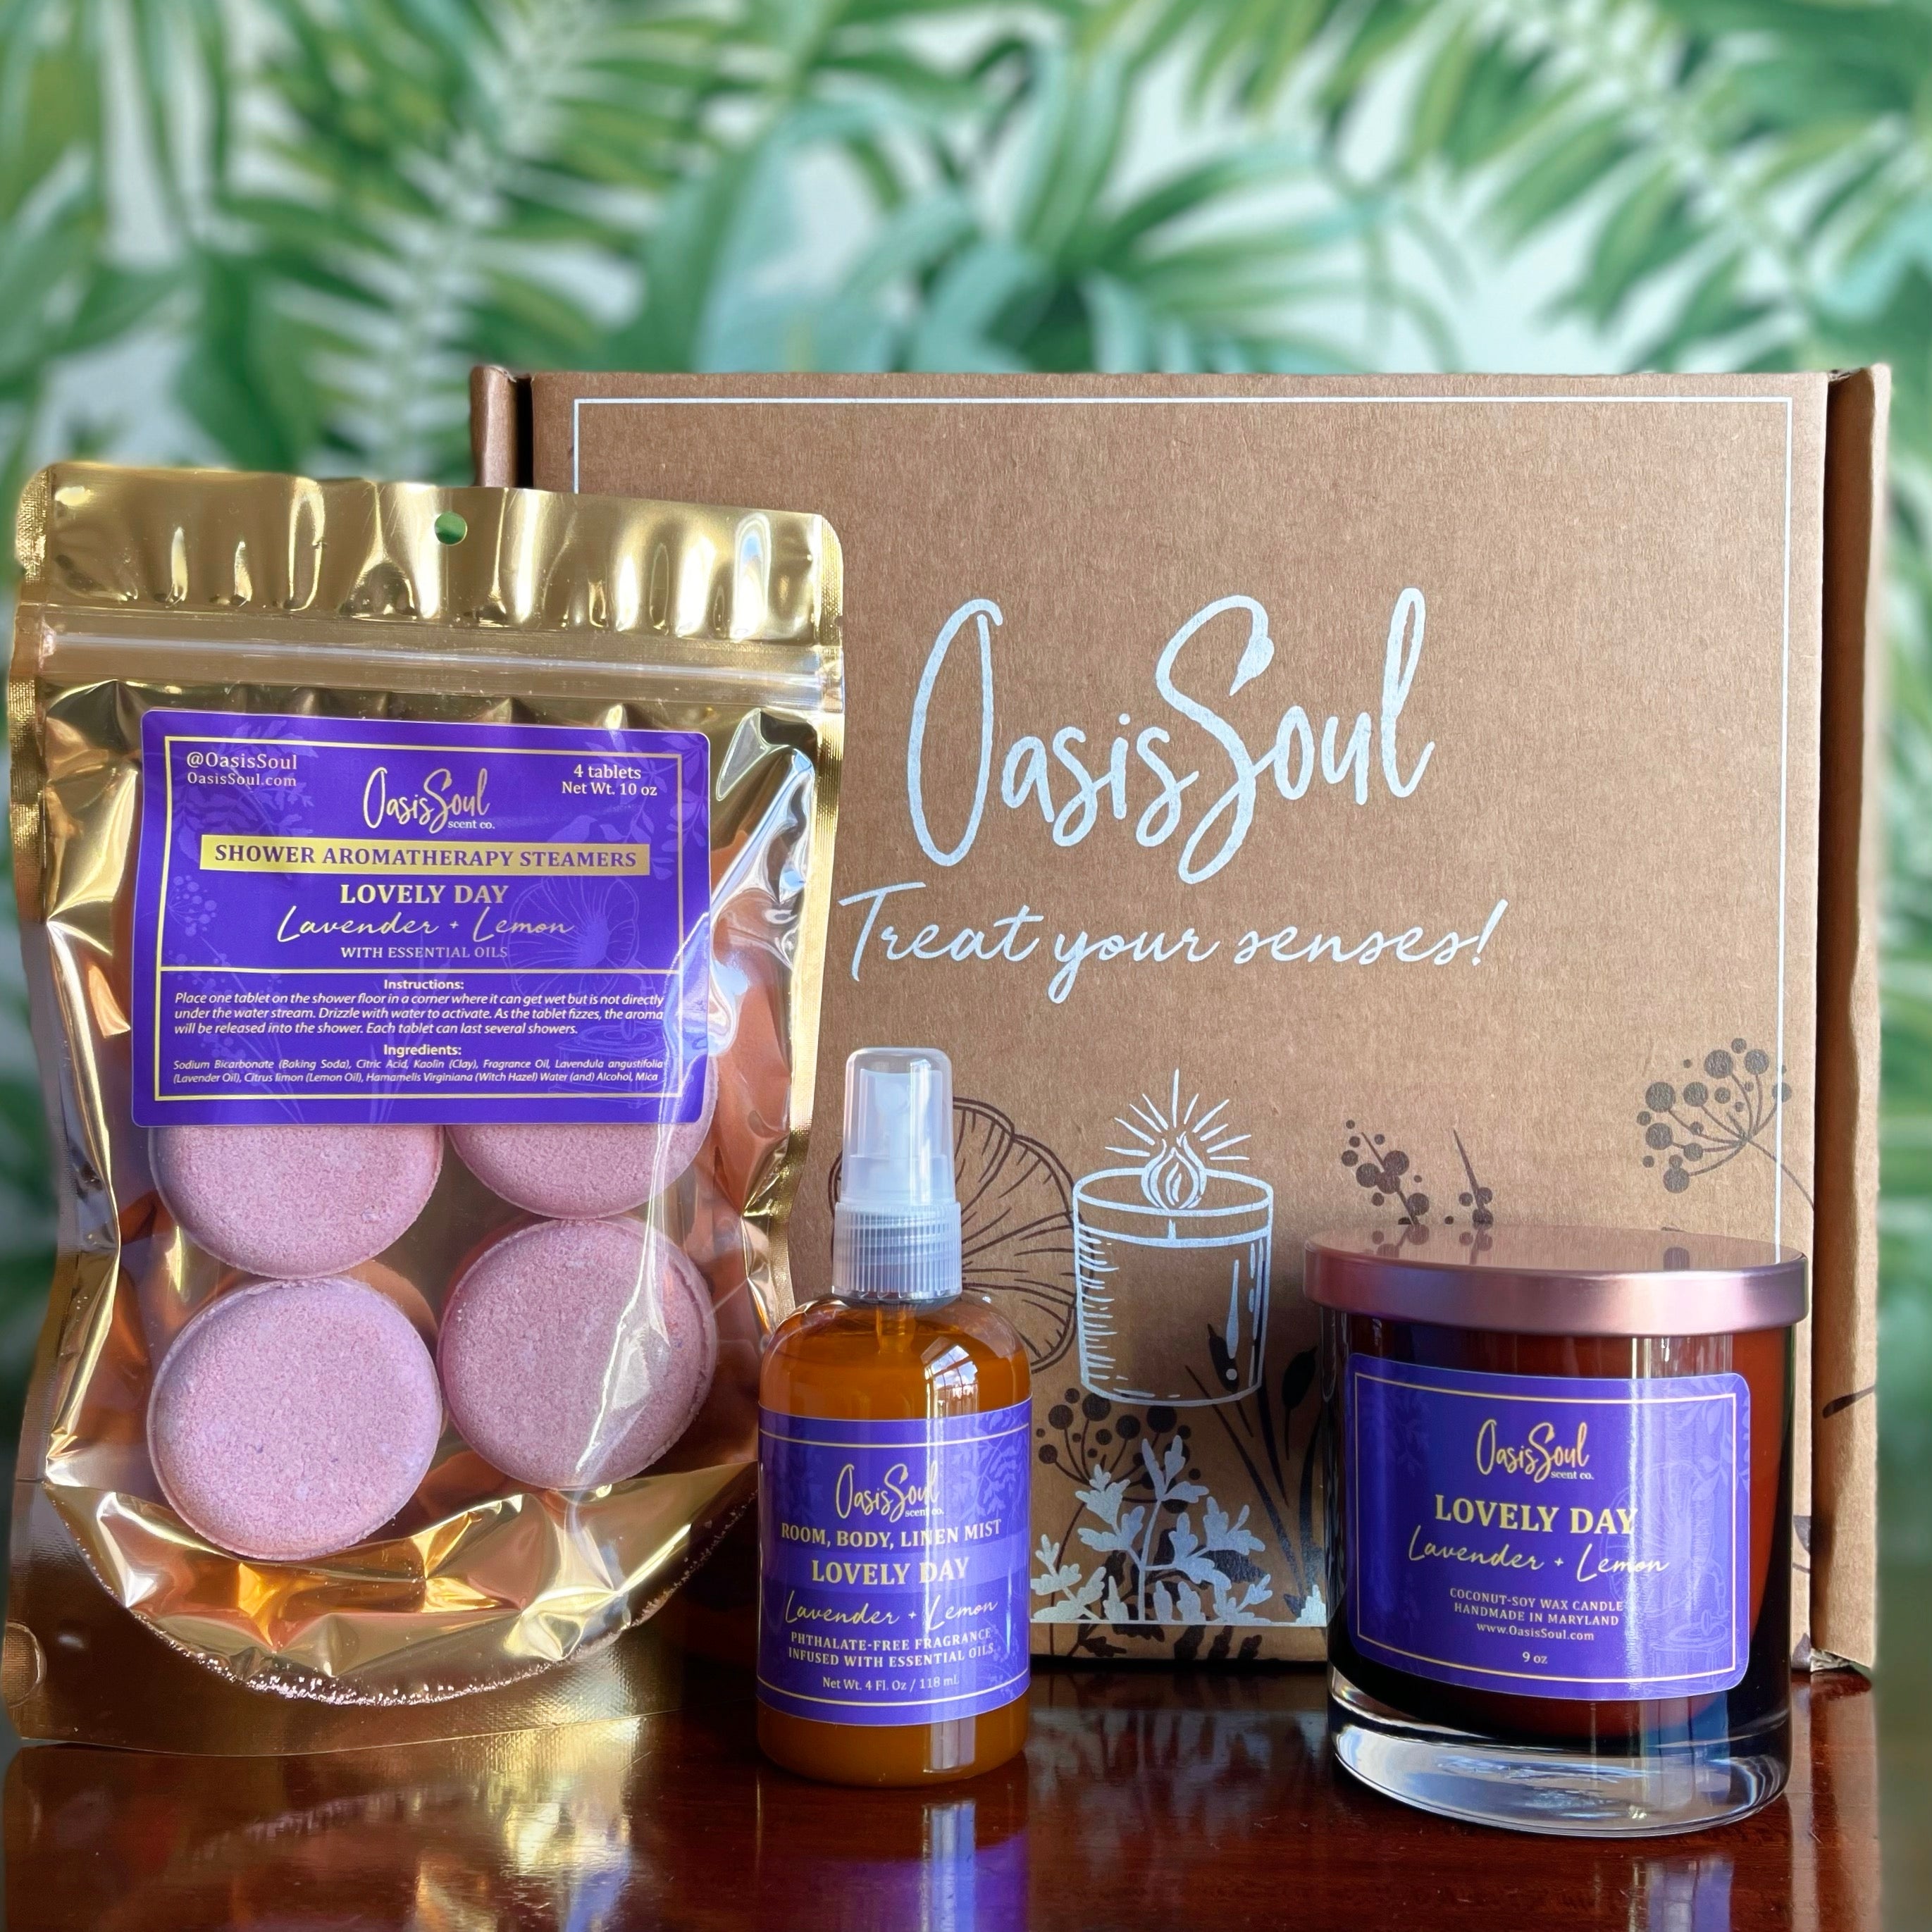 MARLEY Luxe Treat Box